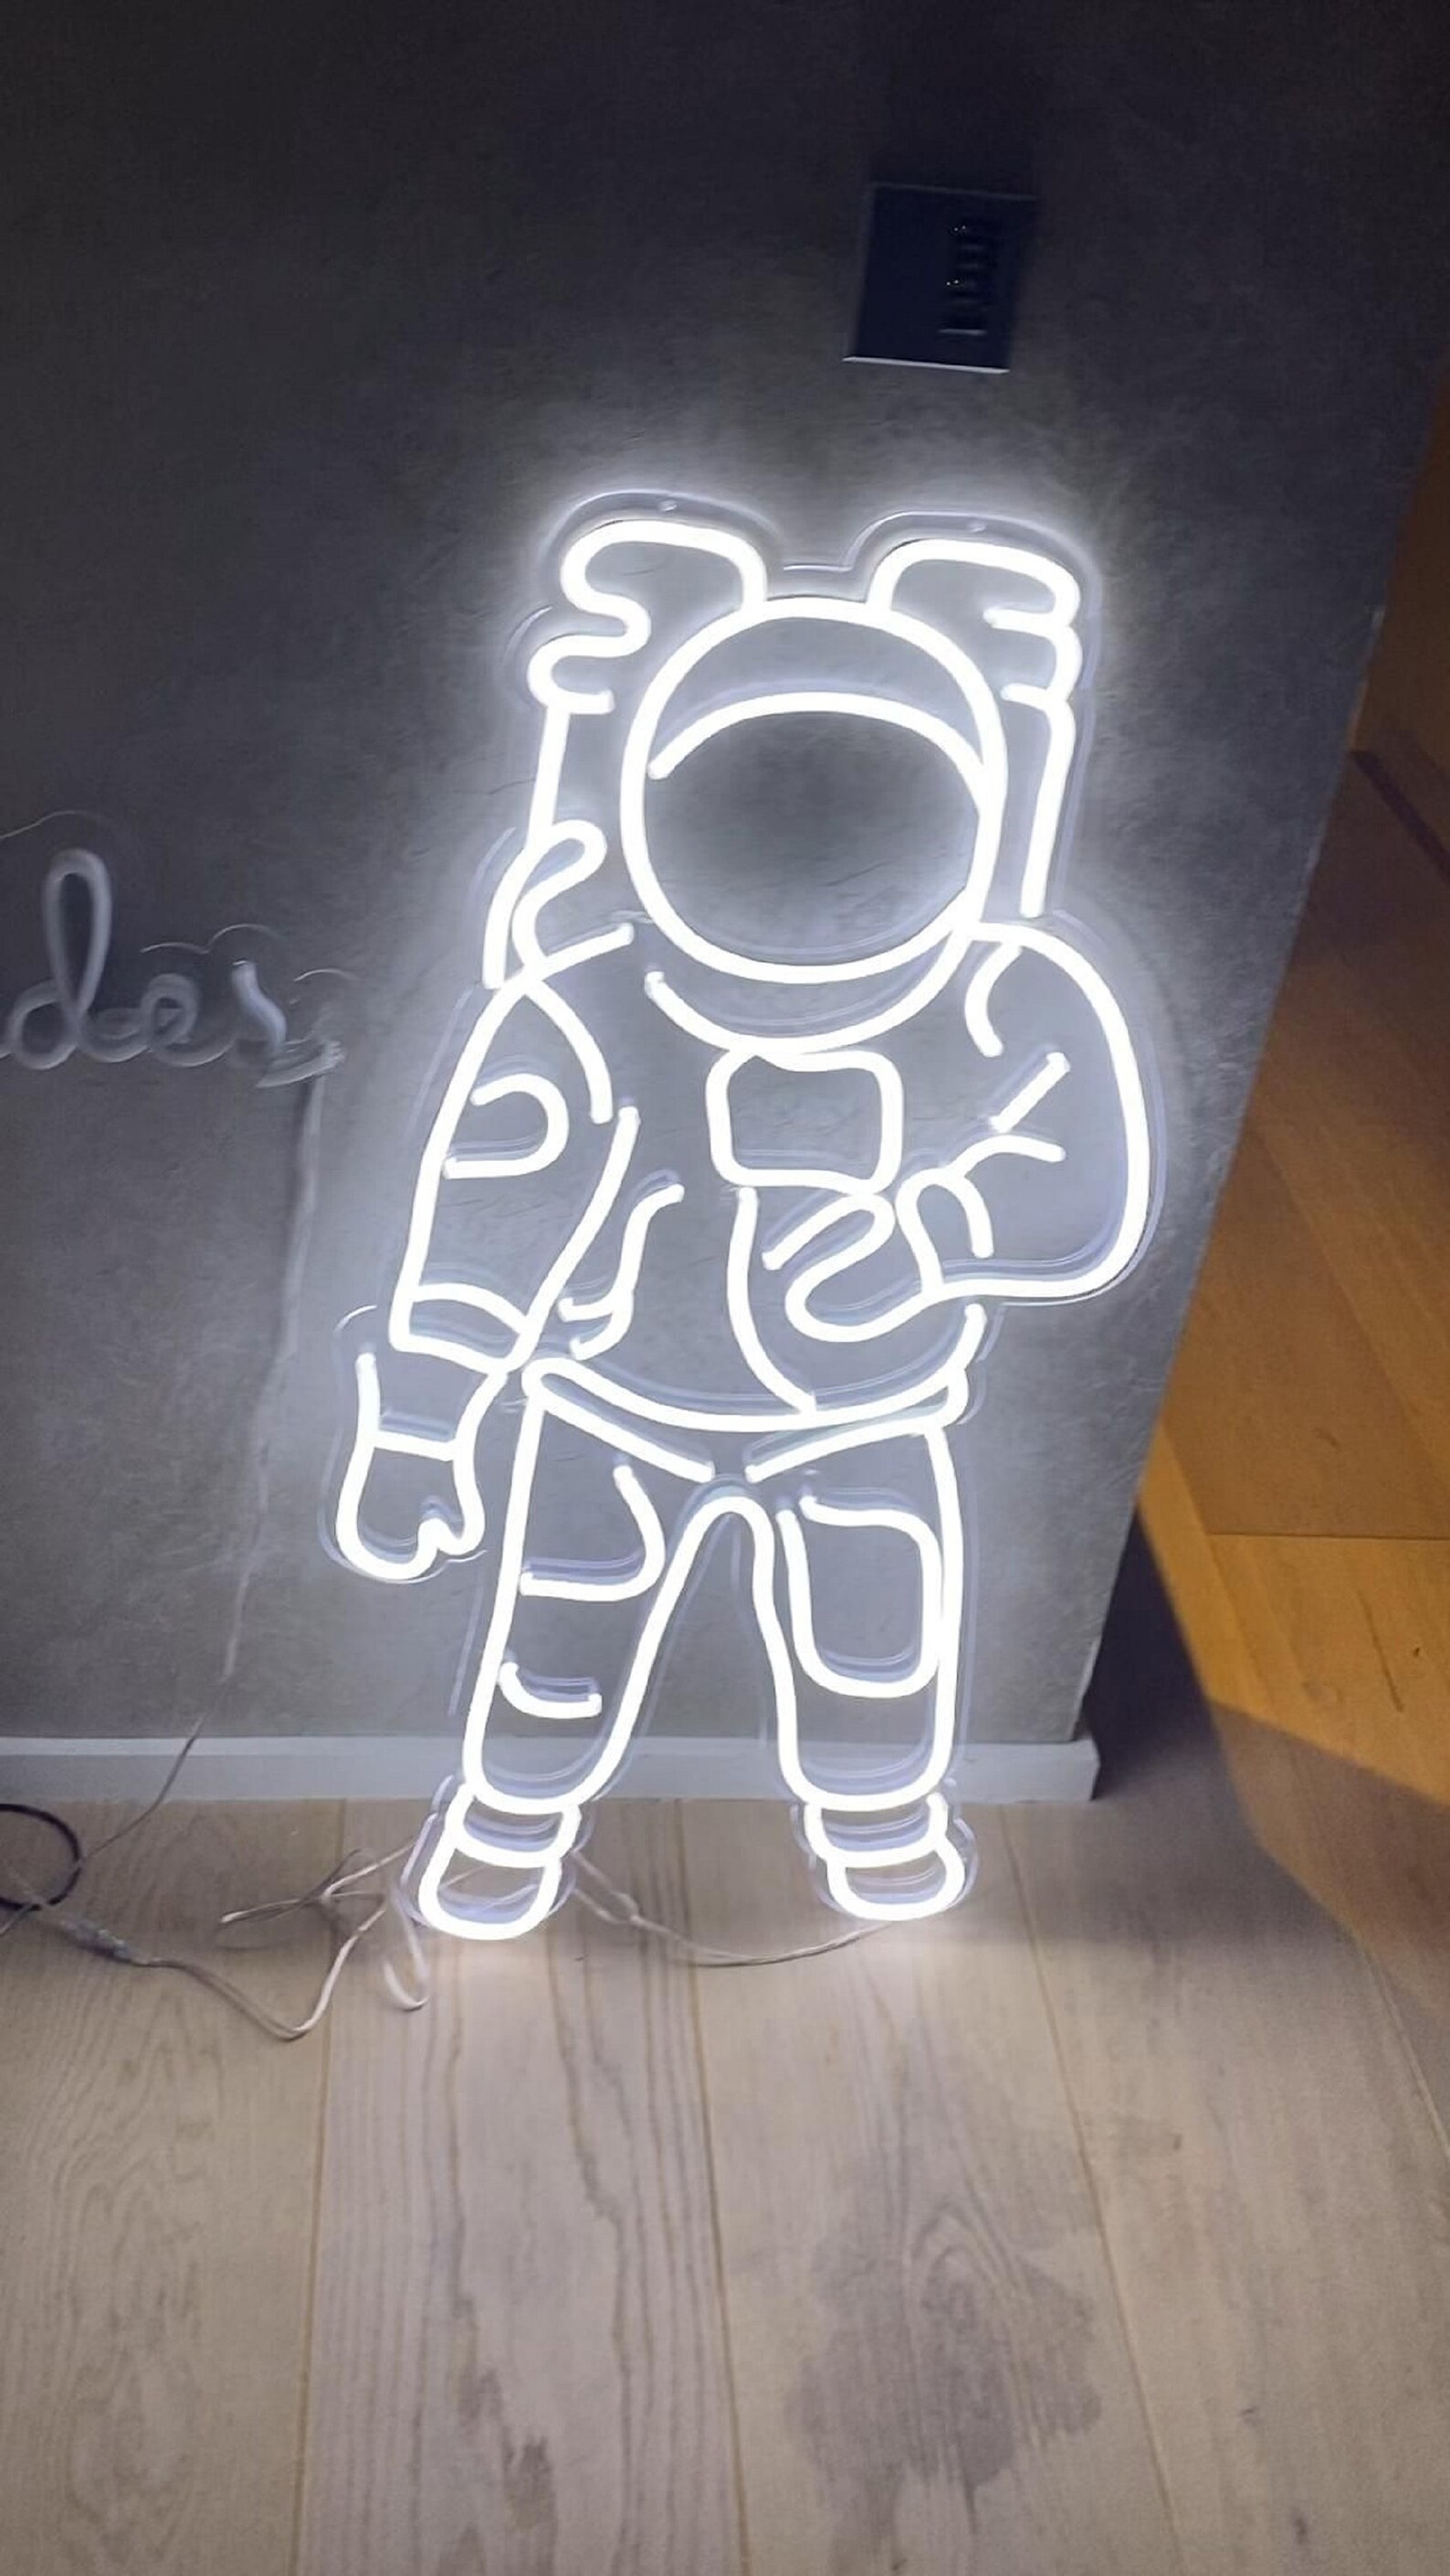 Astronaut Custom Neon Sign Led Art for Home Neon Wall - Etsy